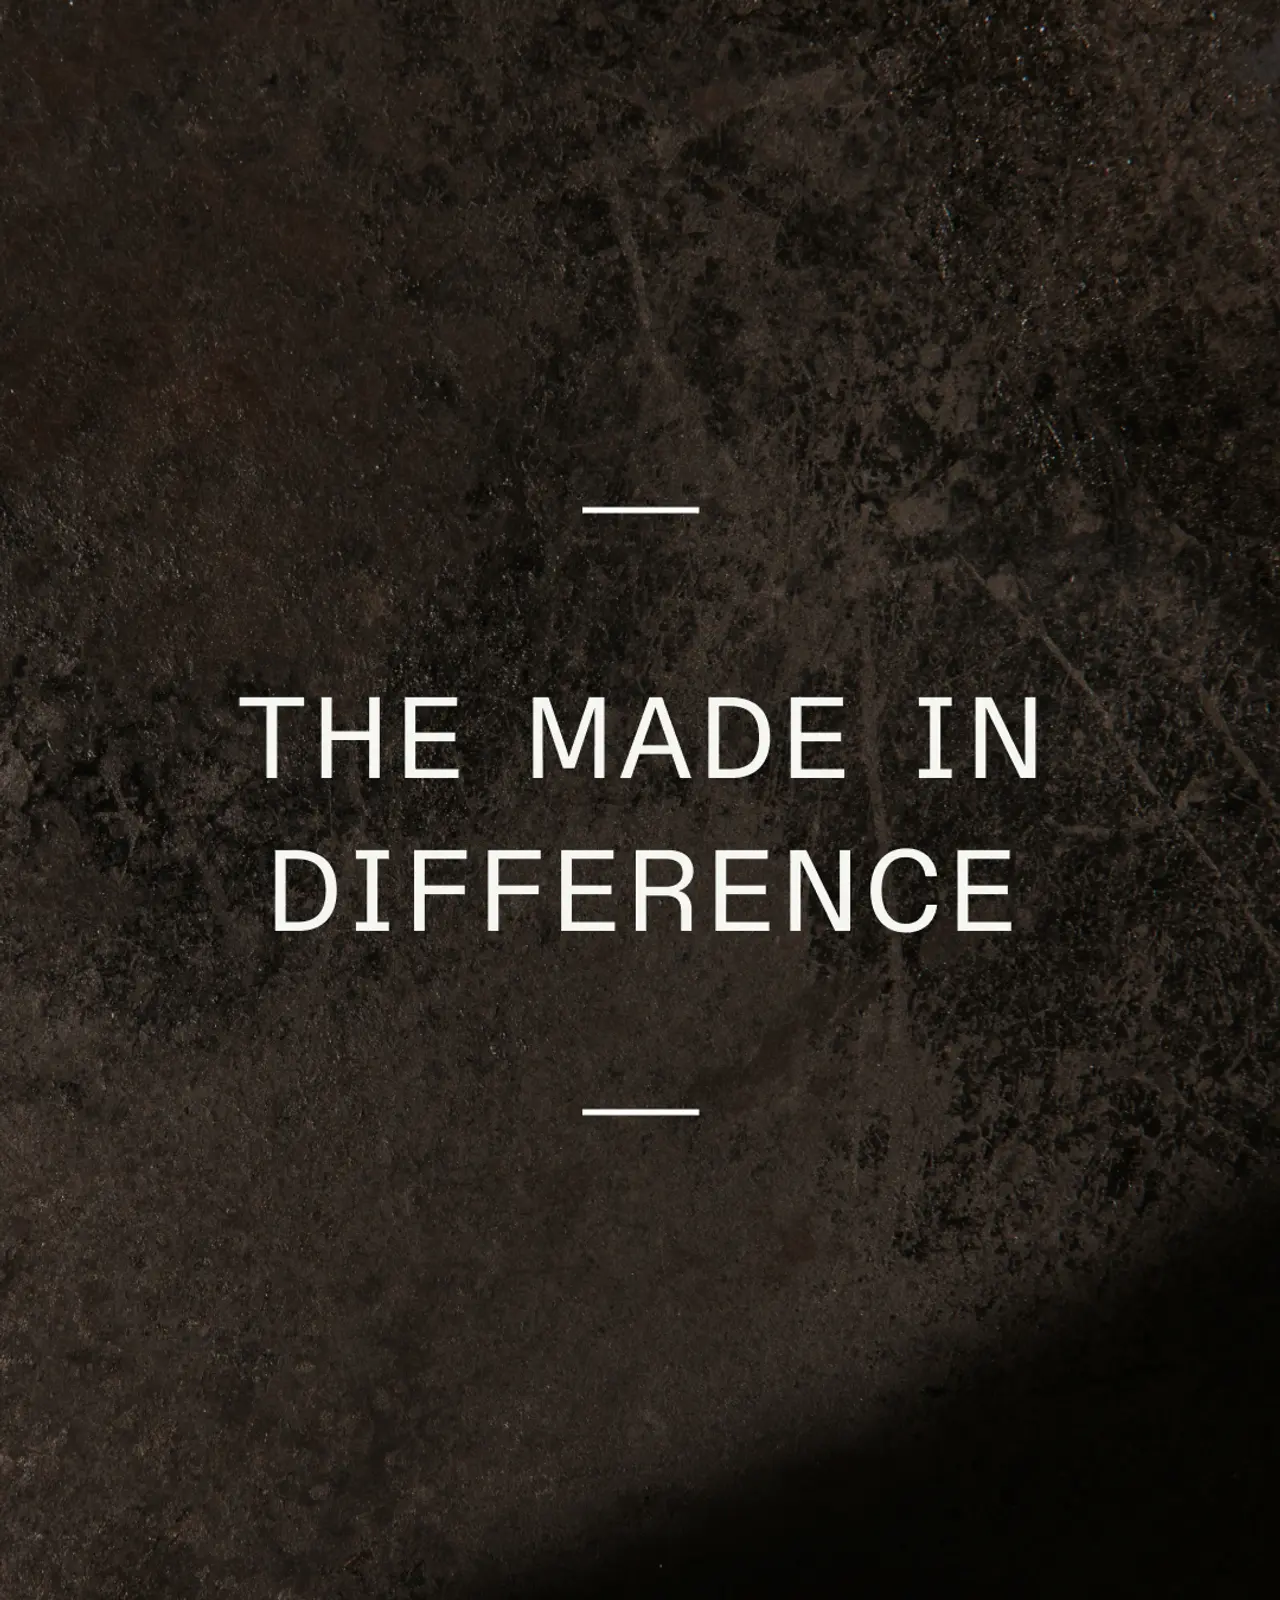 A dark textured background with the phrase "THE MADE IN DIFFERENCE" centered in white, stylish typography.